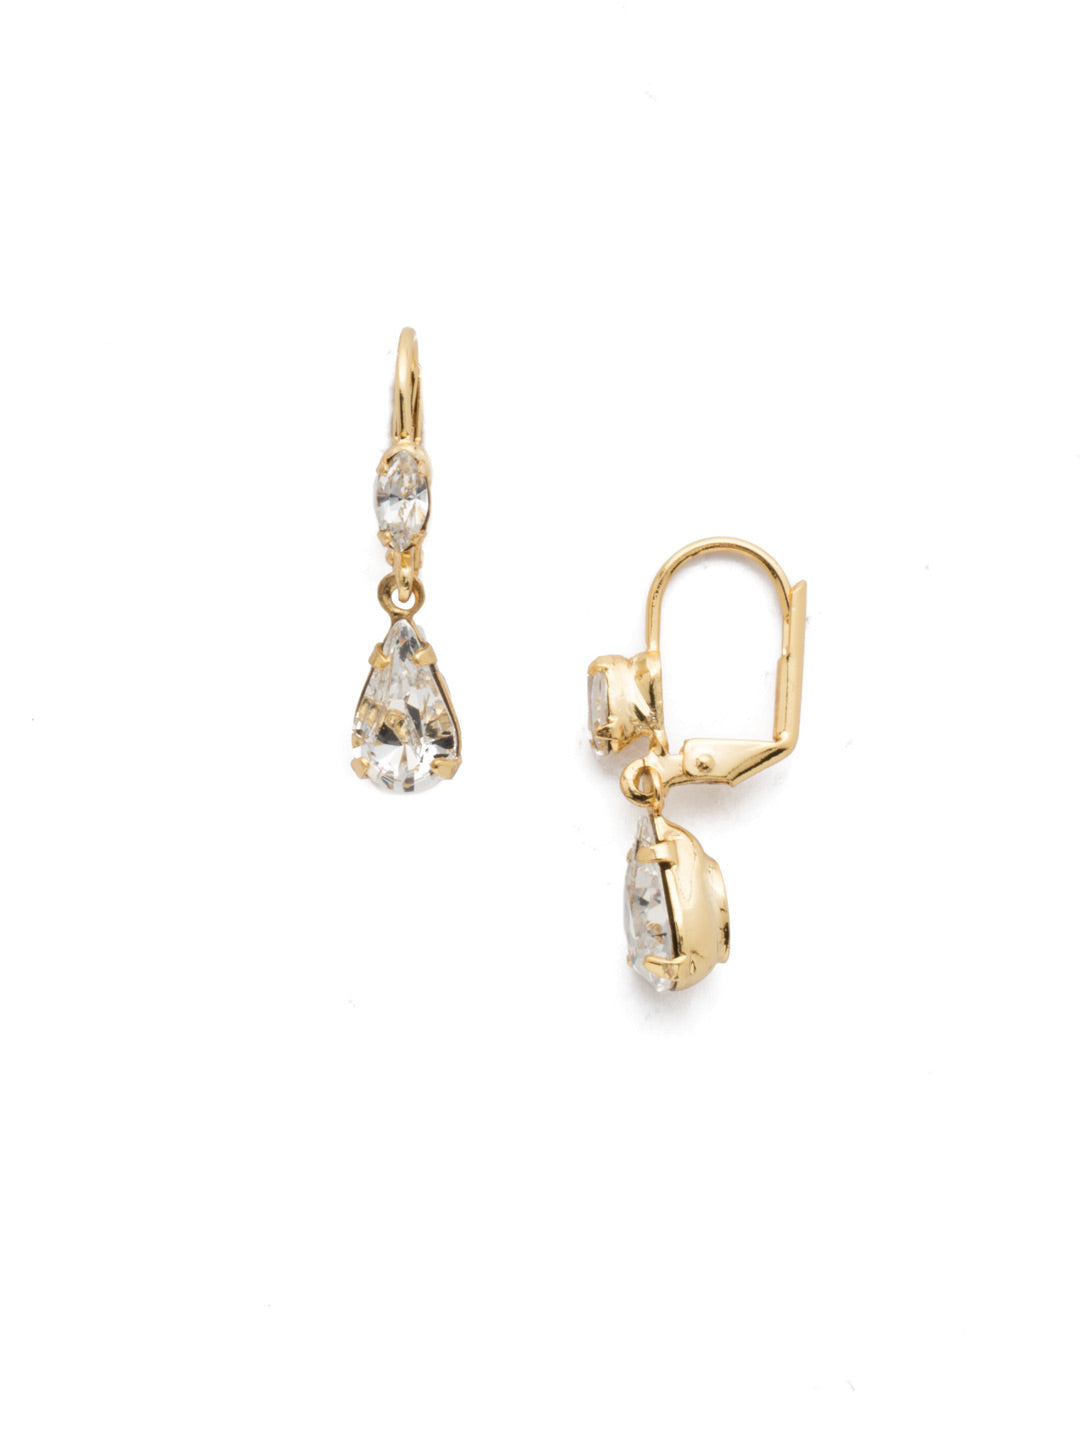 Teardrop Dangle Earrings - EBF20BGCRY - <p>Pair with anything! Antique links connect these faceted crystals to form a delicate frame. The pear shape creates a classic yet distinctive silhouette. From Sorrelli's Crystal collection in our Bright Gold-tone finish.</p>